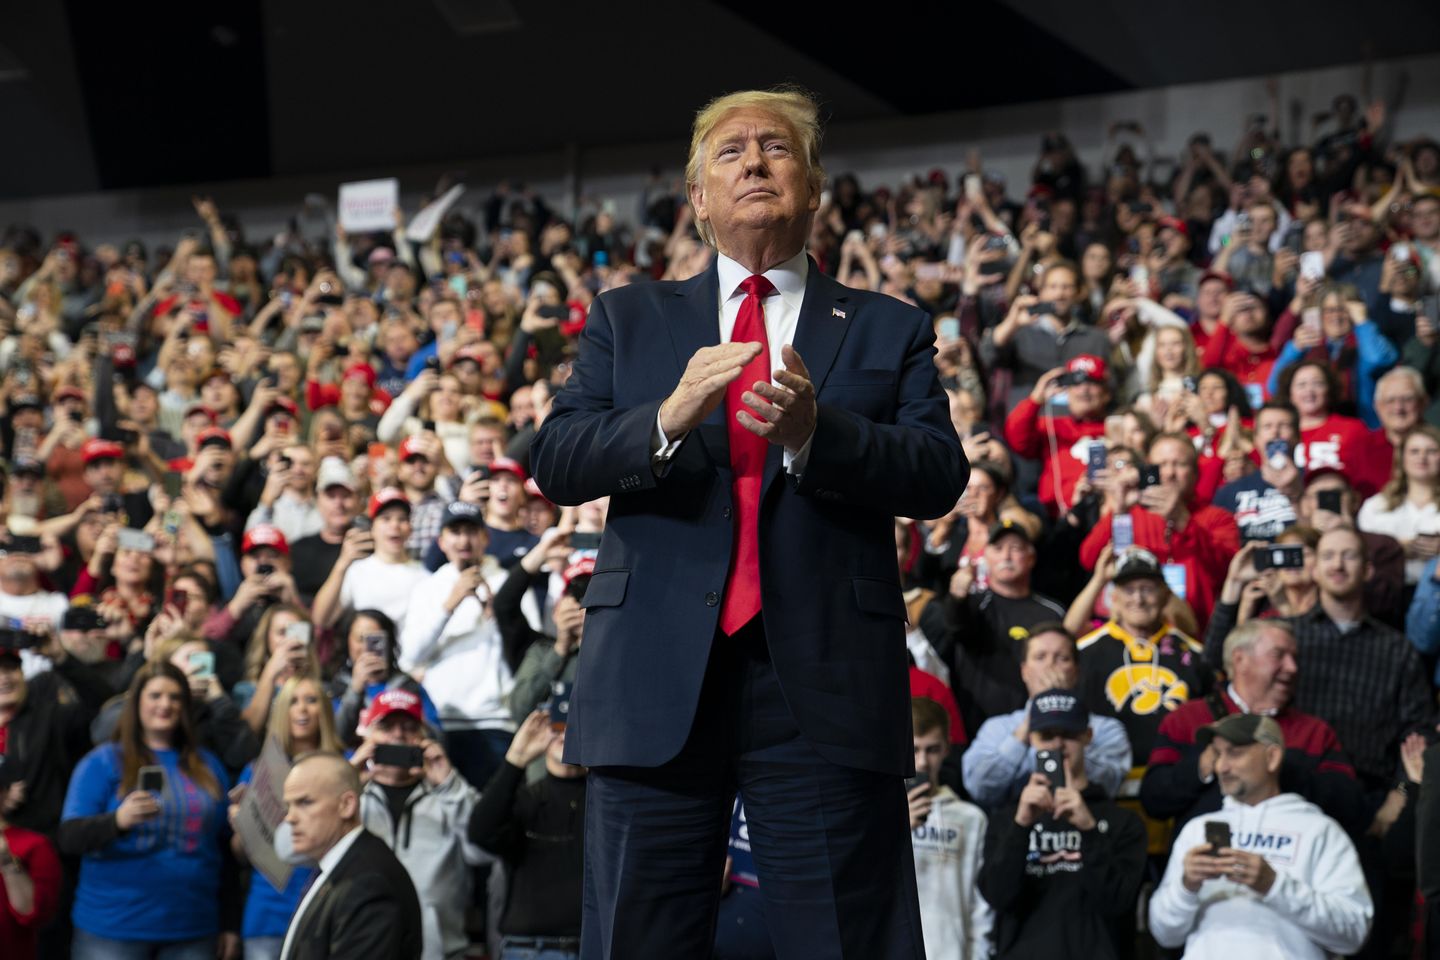 Donald Trump to hold first 2024 rally in Waco, Texas